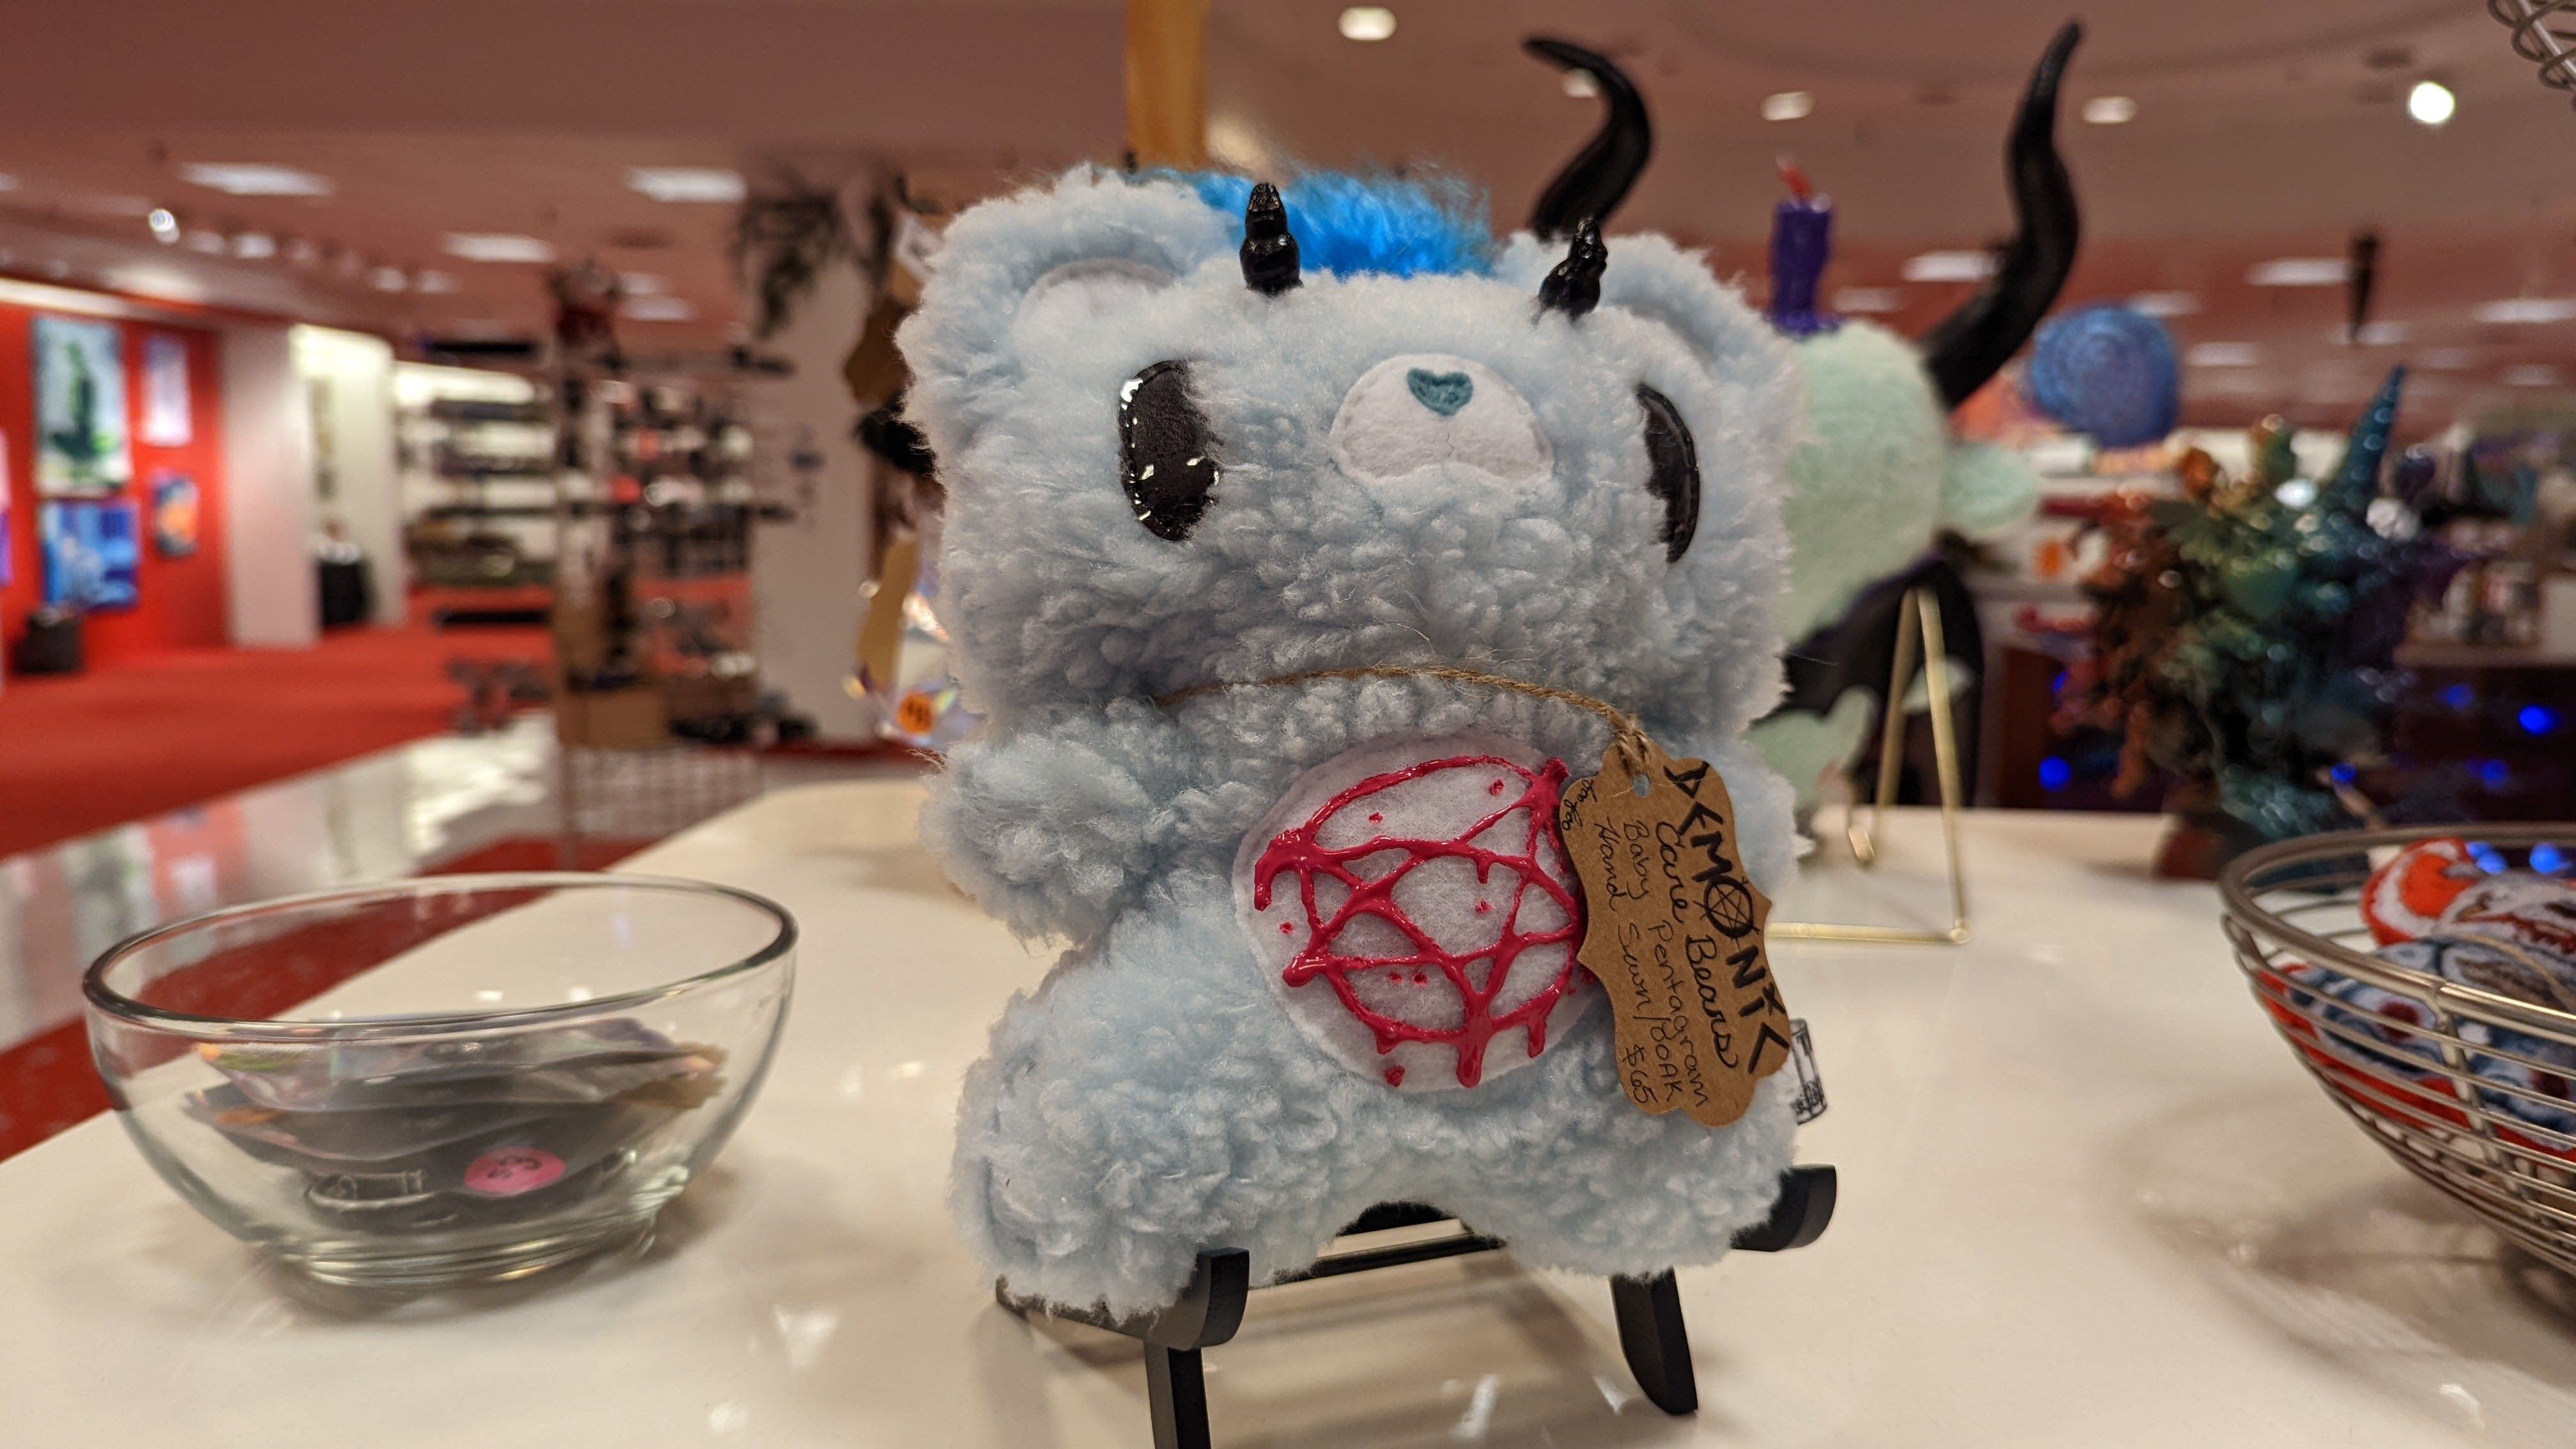 A Care Bare stuffed animal features a pentagram on its belly and horns on its head.